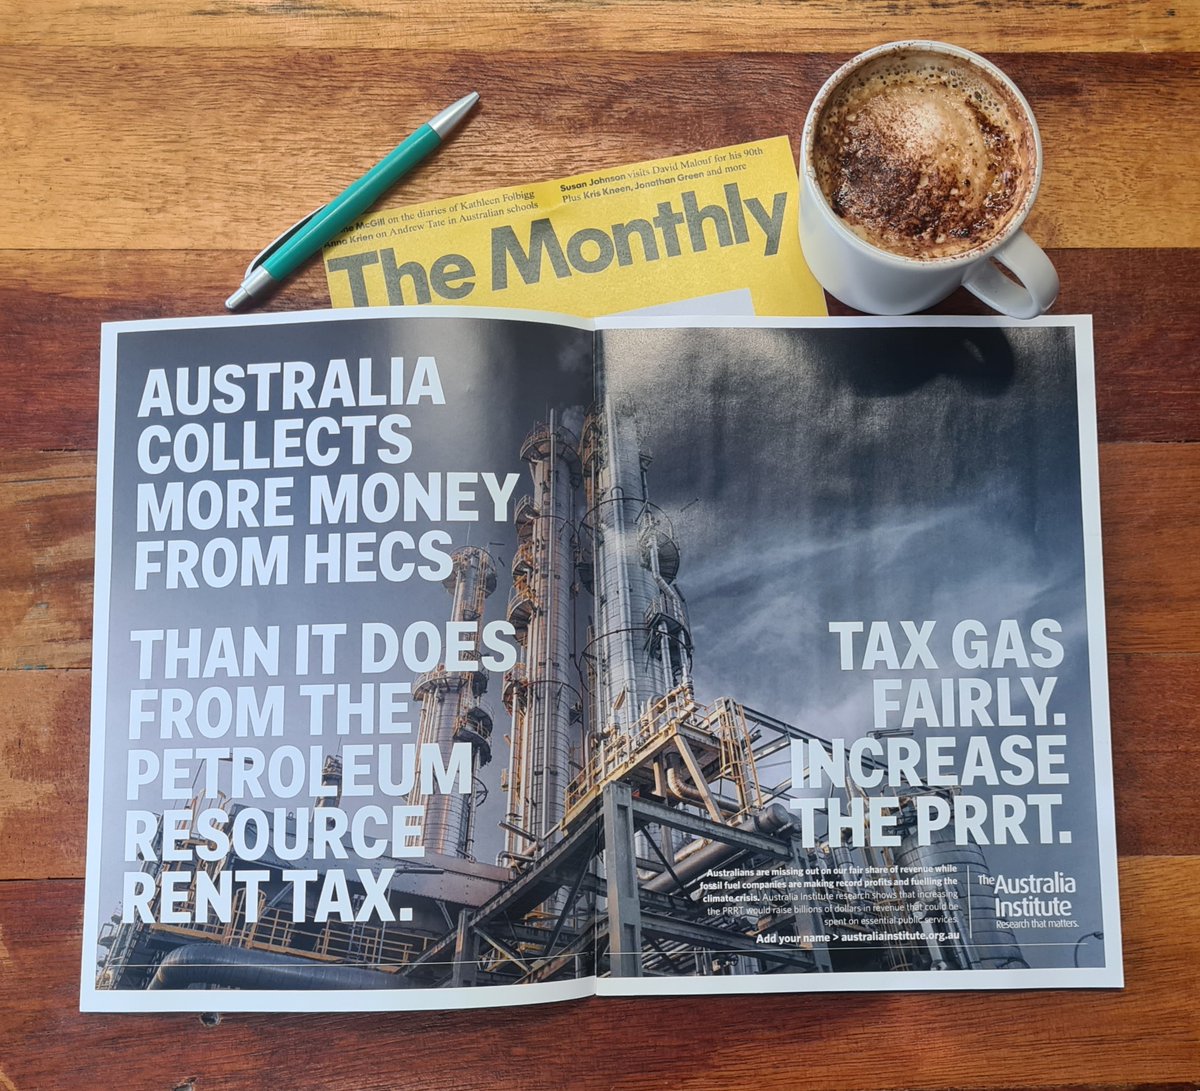 Australia collects more money from HECS than it does from the PRRT. #auspol #climate We put this ad in @THEMONTHLY, calling for the Aus Govt to tax gas fairly. ✍️Sign our petition to increase the PRRT here: nb.australiainstitute.org.au/increase_the_p…